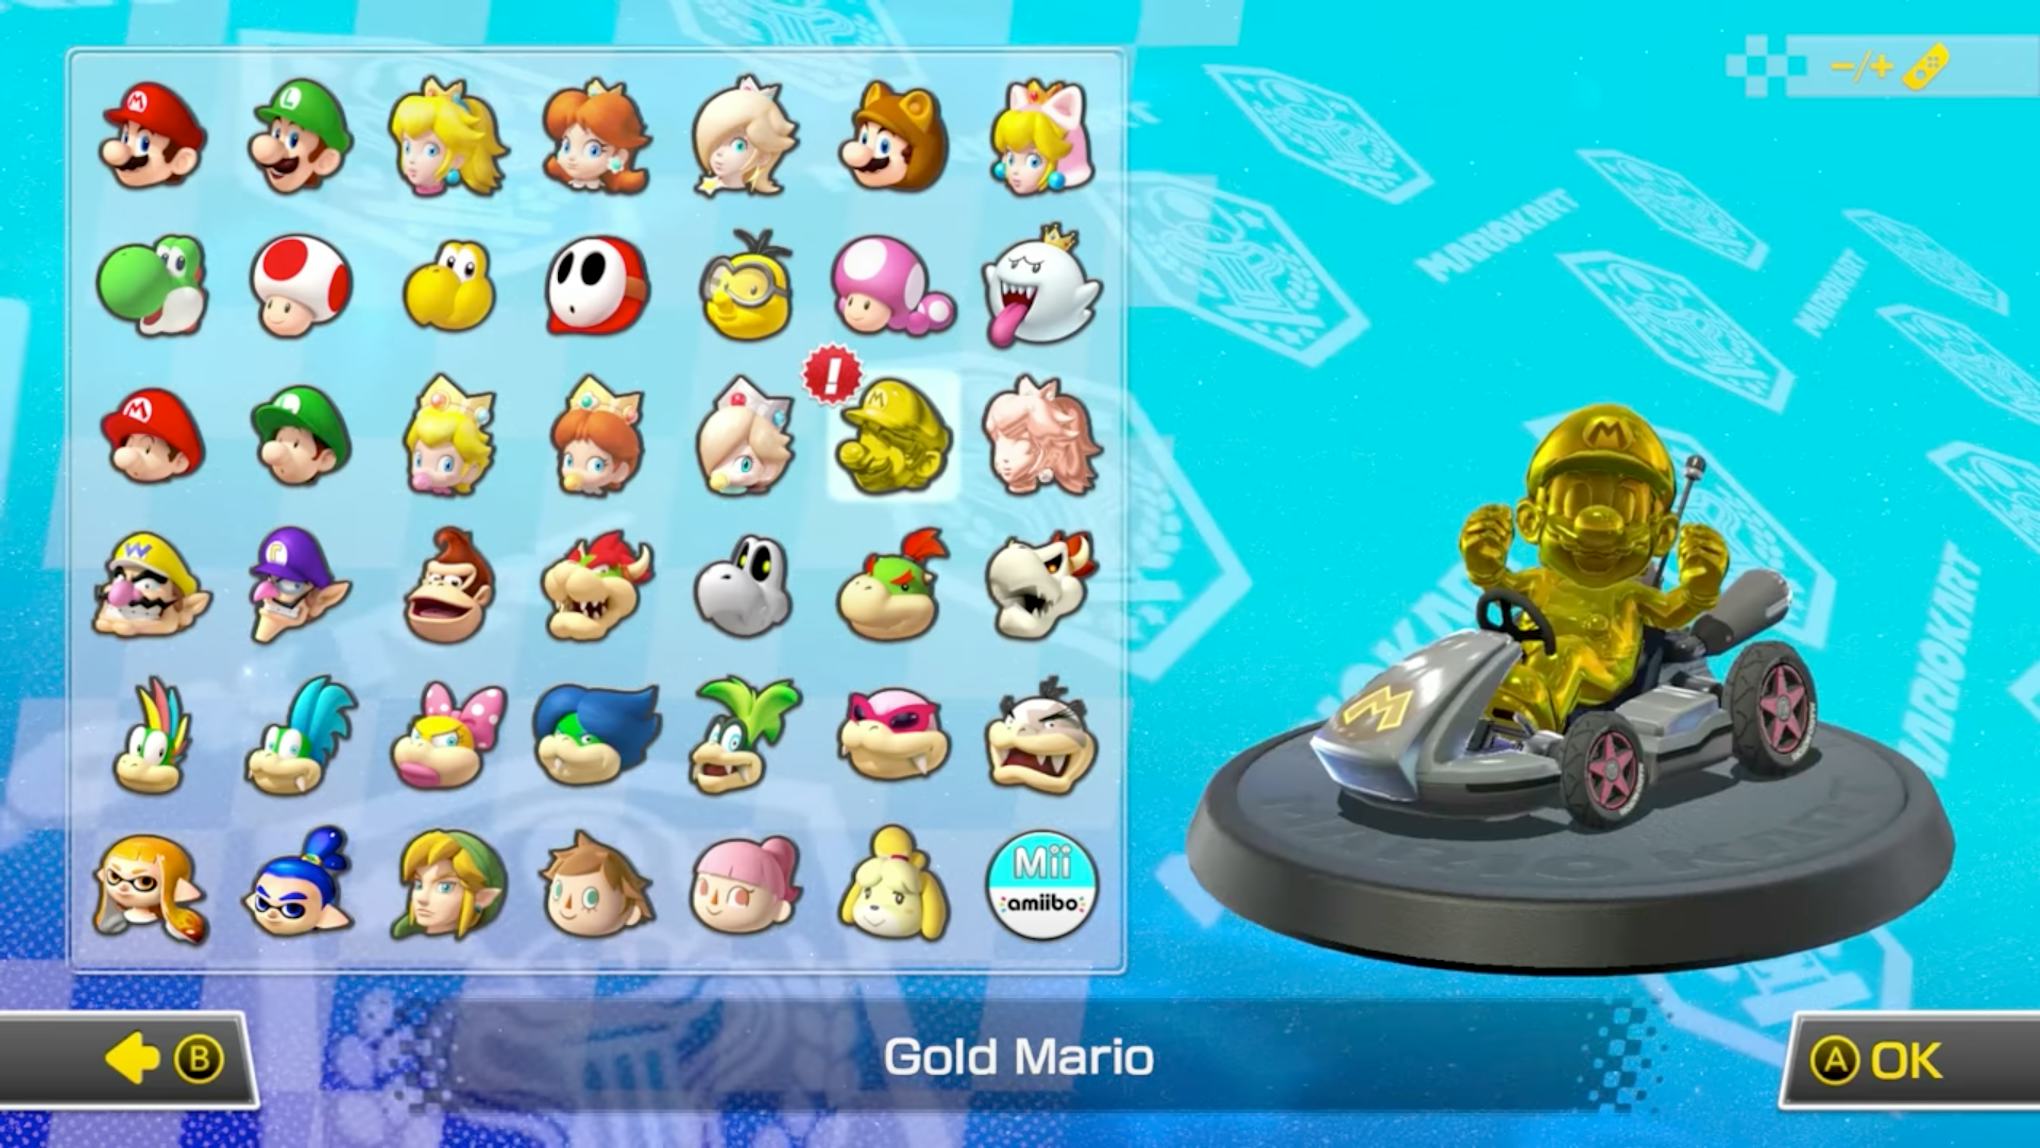 'Mario Kart 8 Deluxe' Unlockable Characters Getting Gold Mario on the